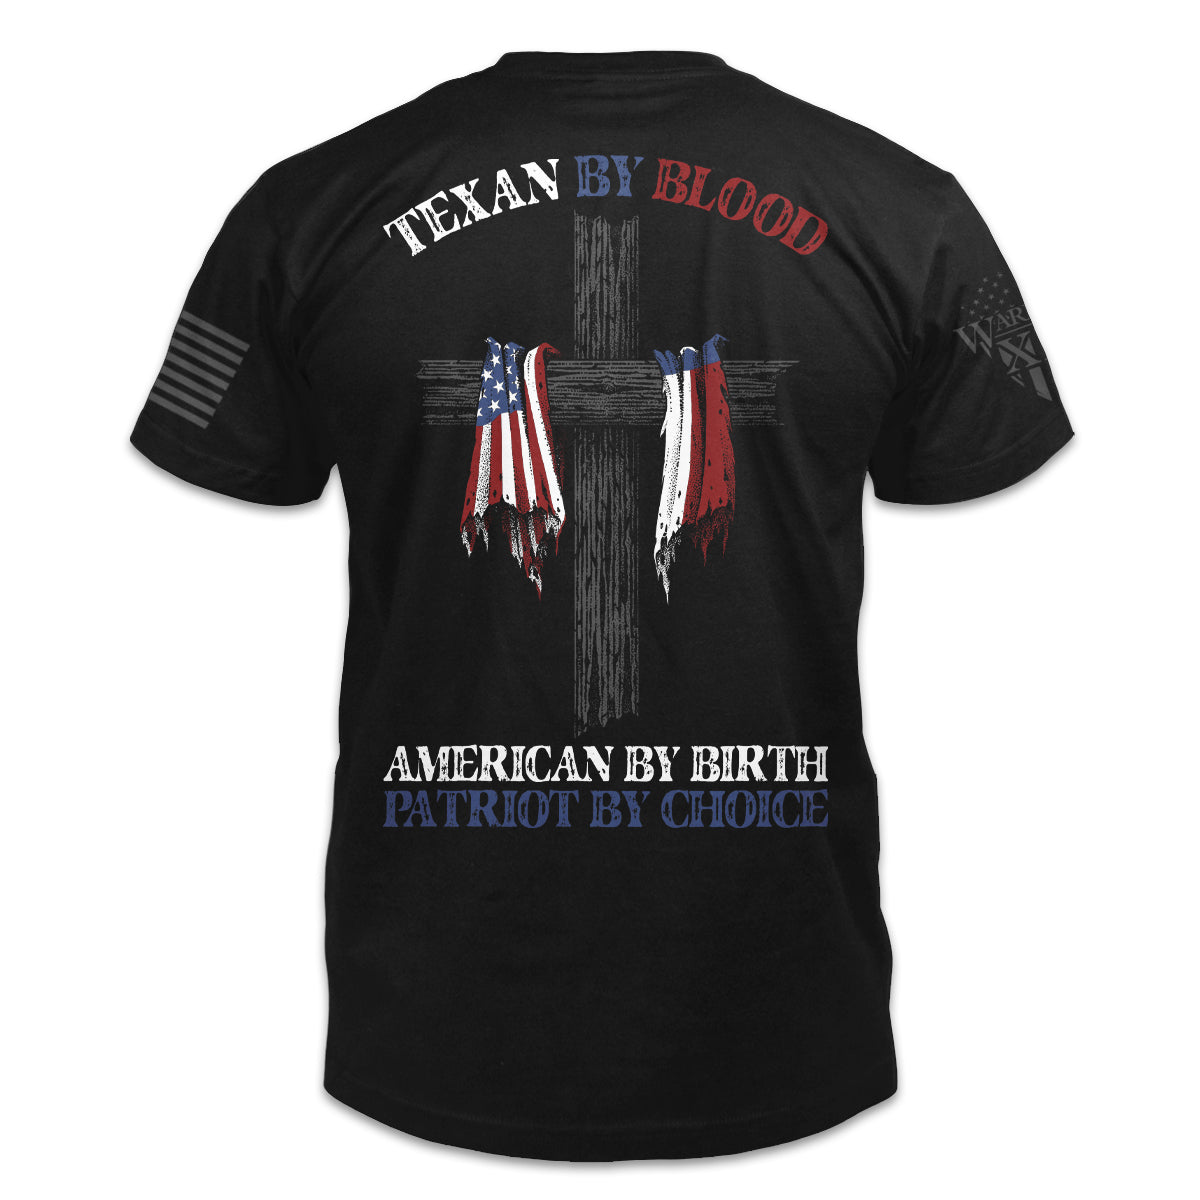 A black t-shirt with the words "Texan by blood, American by birth, patriot by choice" with the Texas and USA flag printed on the back of the shirt.